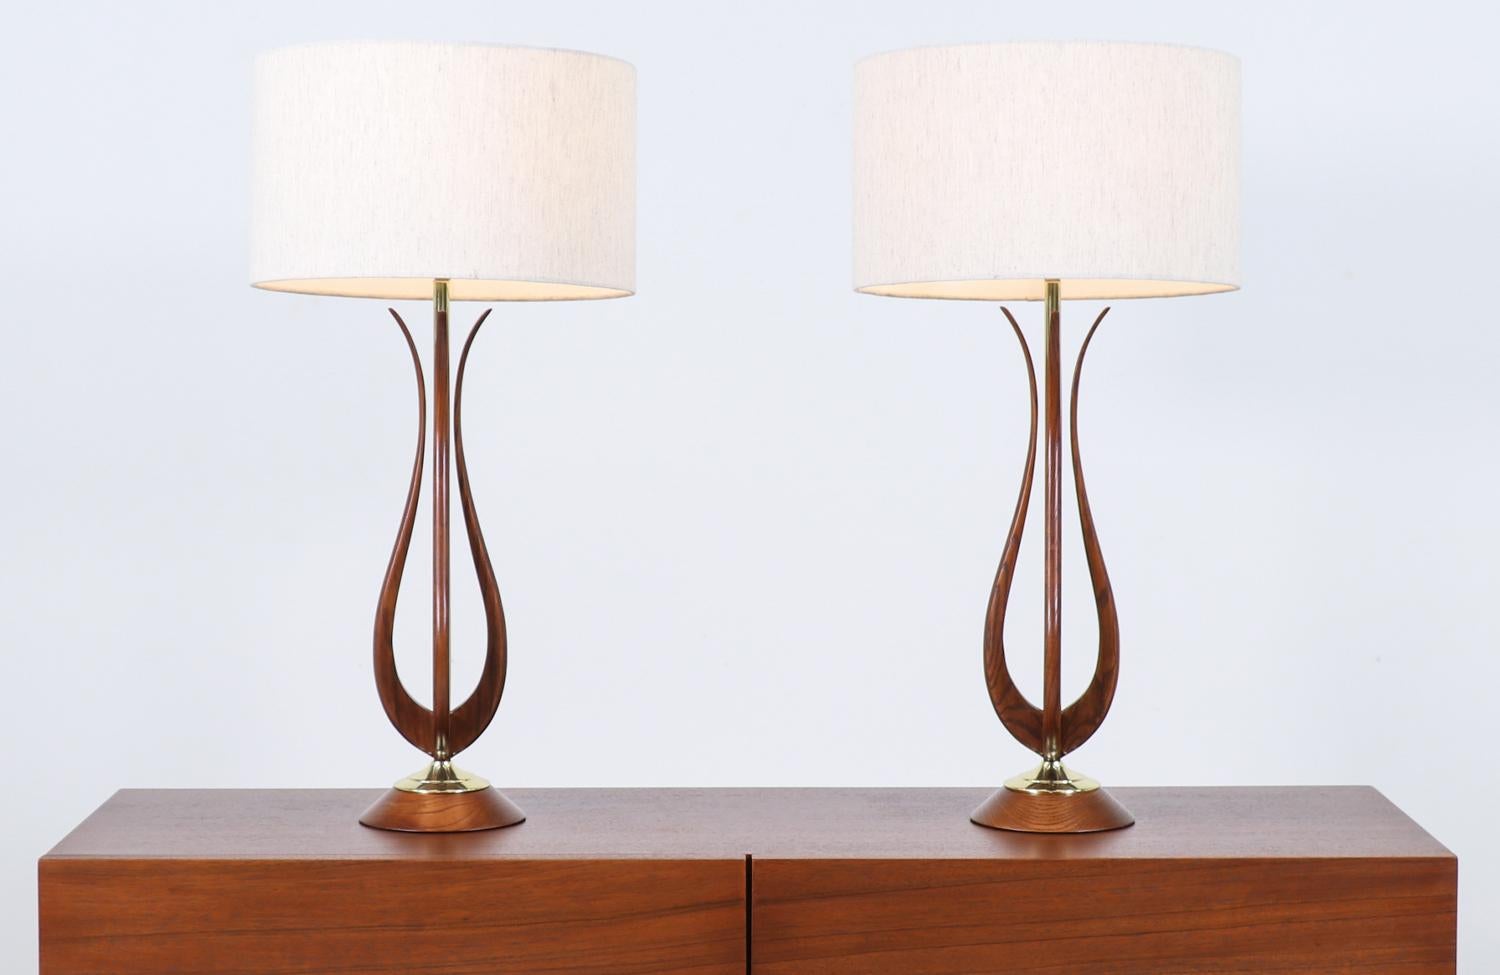 Mid-Century Modern sculpted walnut table lamps with brass accents.

________________________________________

Transforming a piece of Mid-Century Modern furniture is like bringing history back to life, and we take this journey with passion and